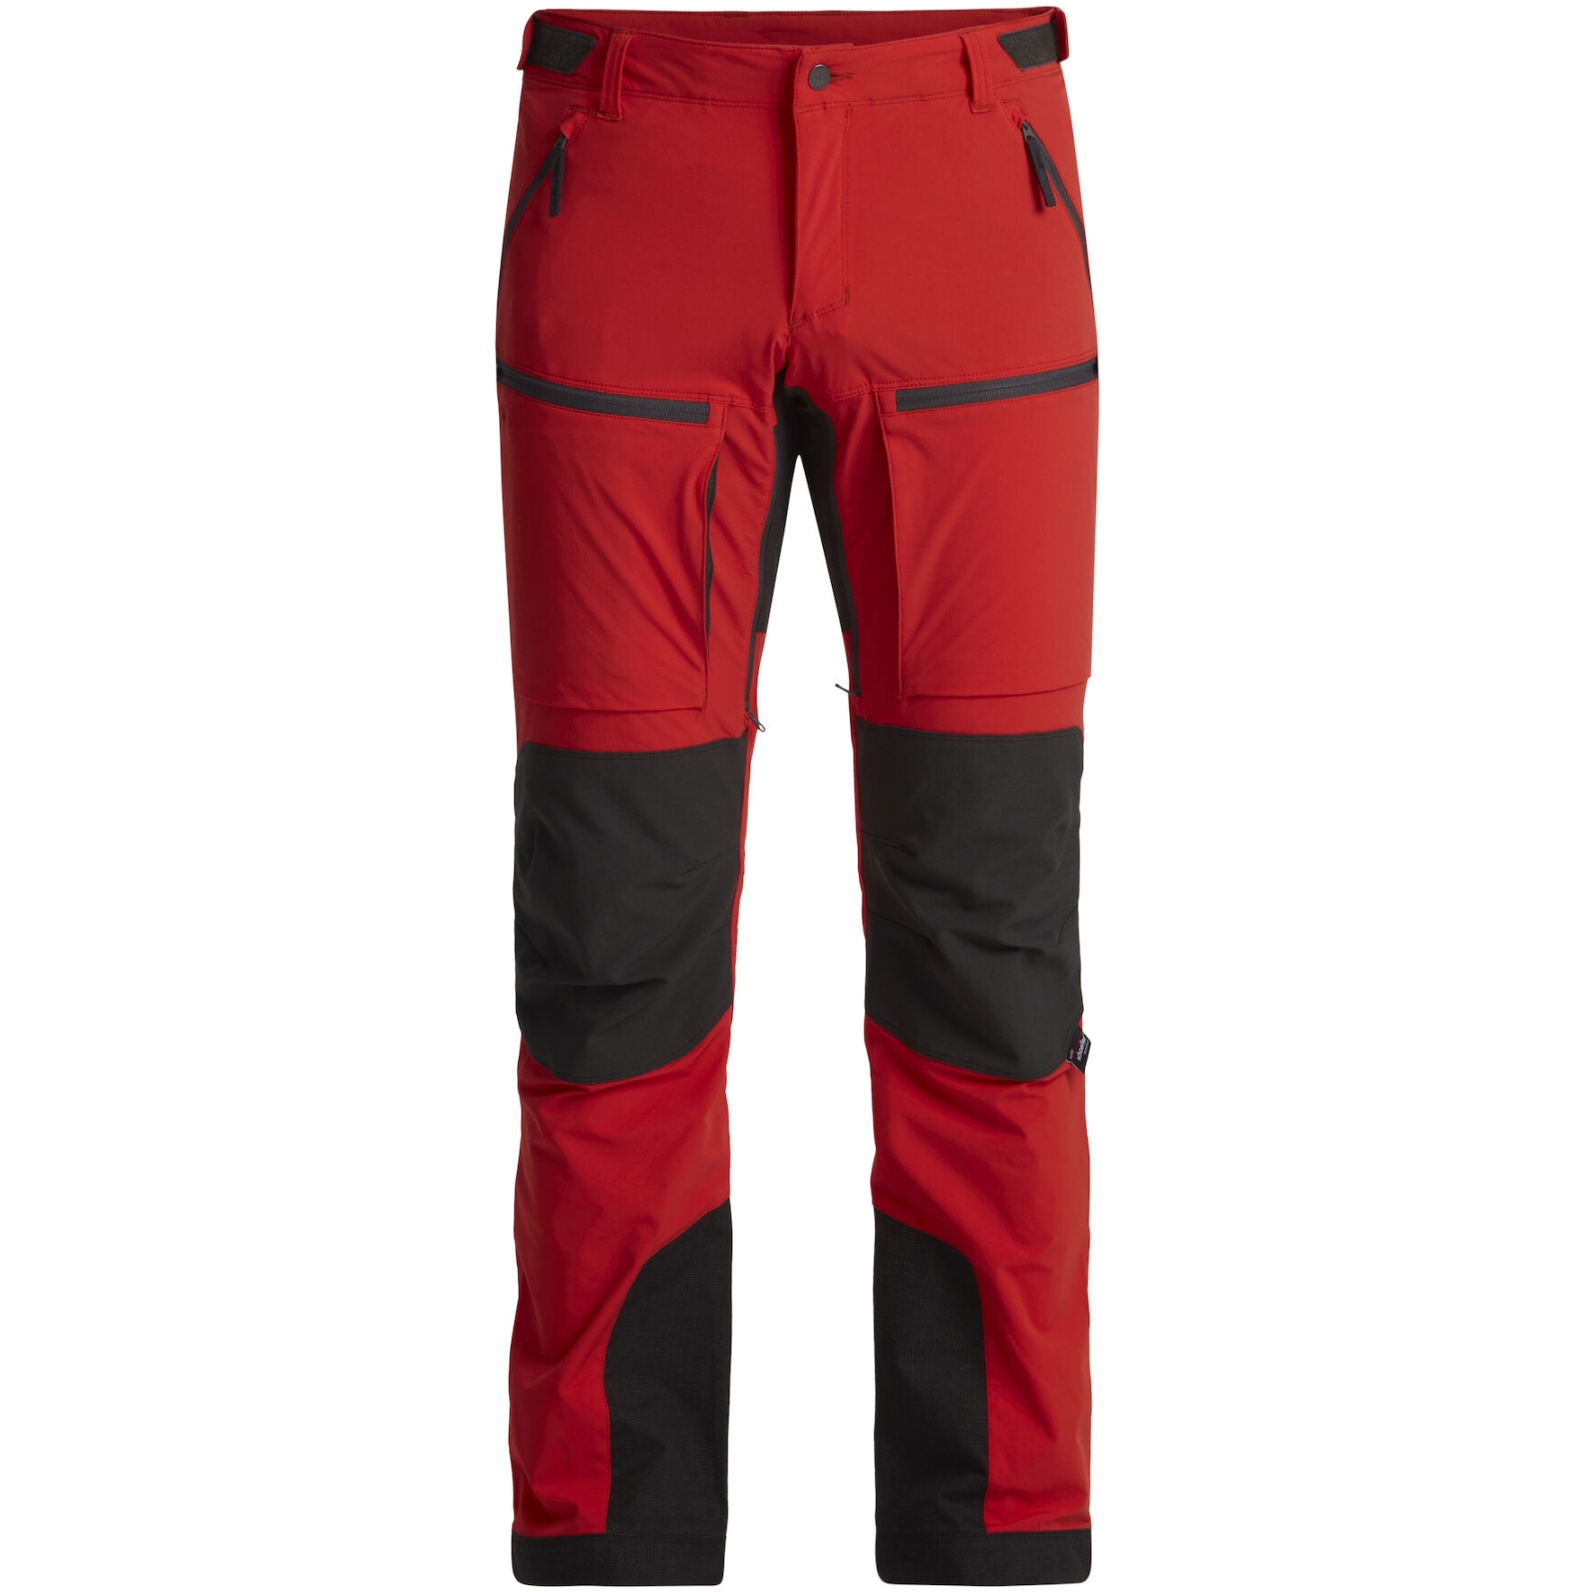 Picture of Lundhags Askro Pro Hiking Pants Men - Lively Red/Charcoal 253